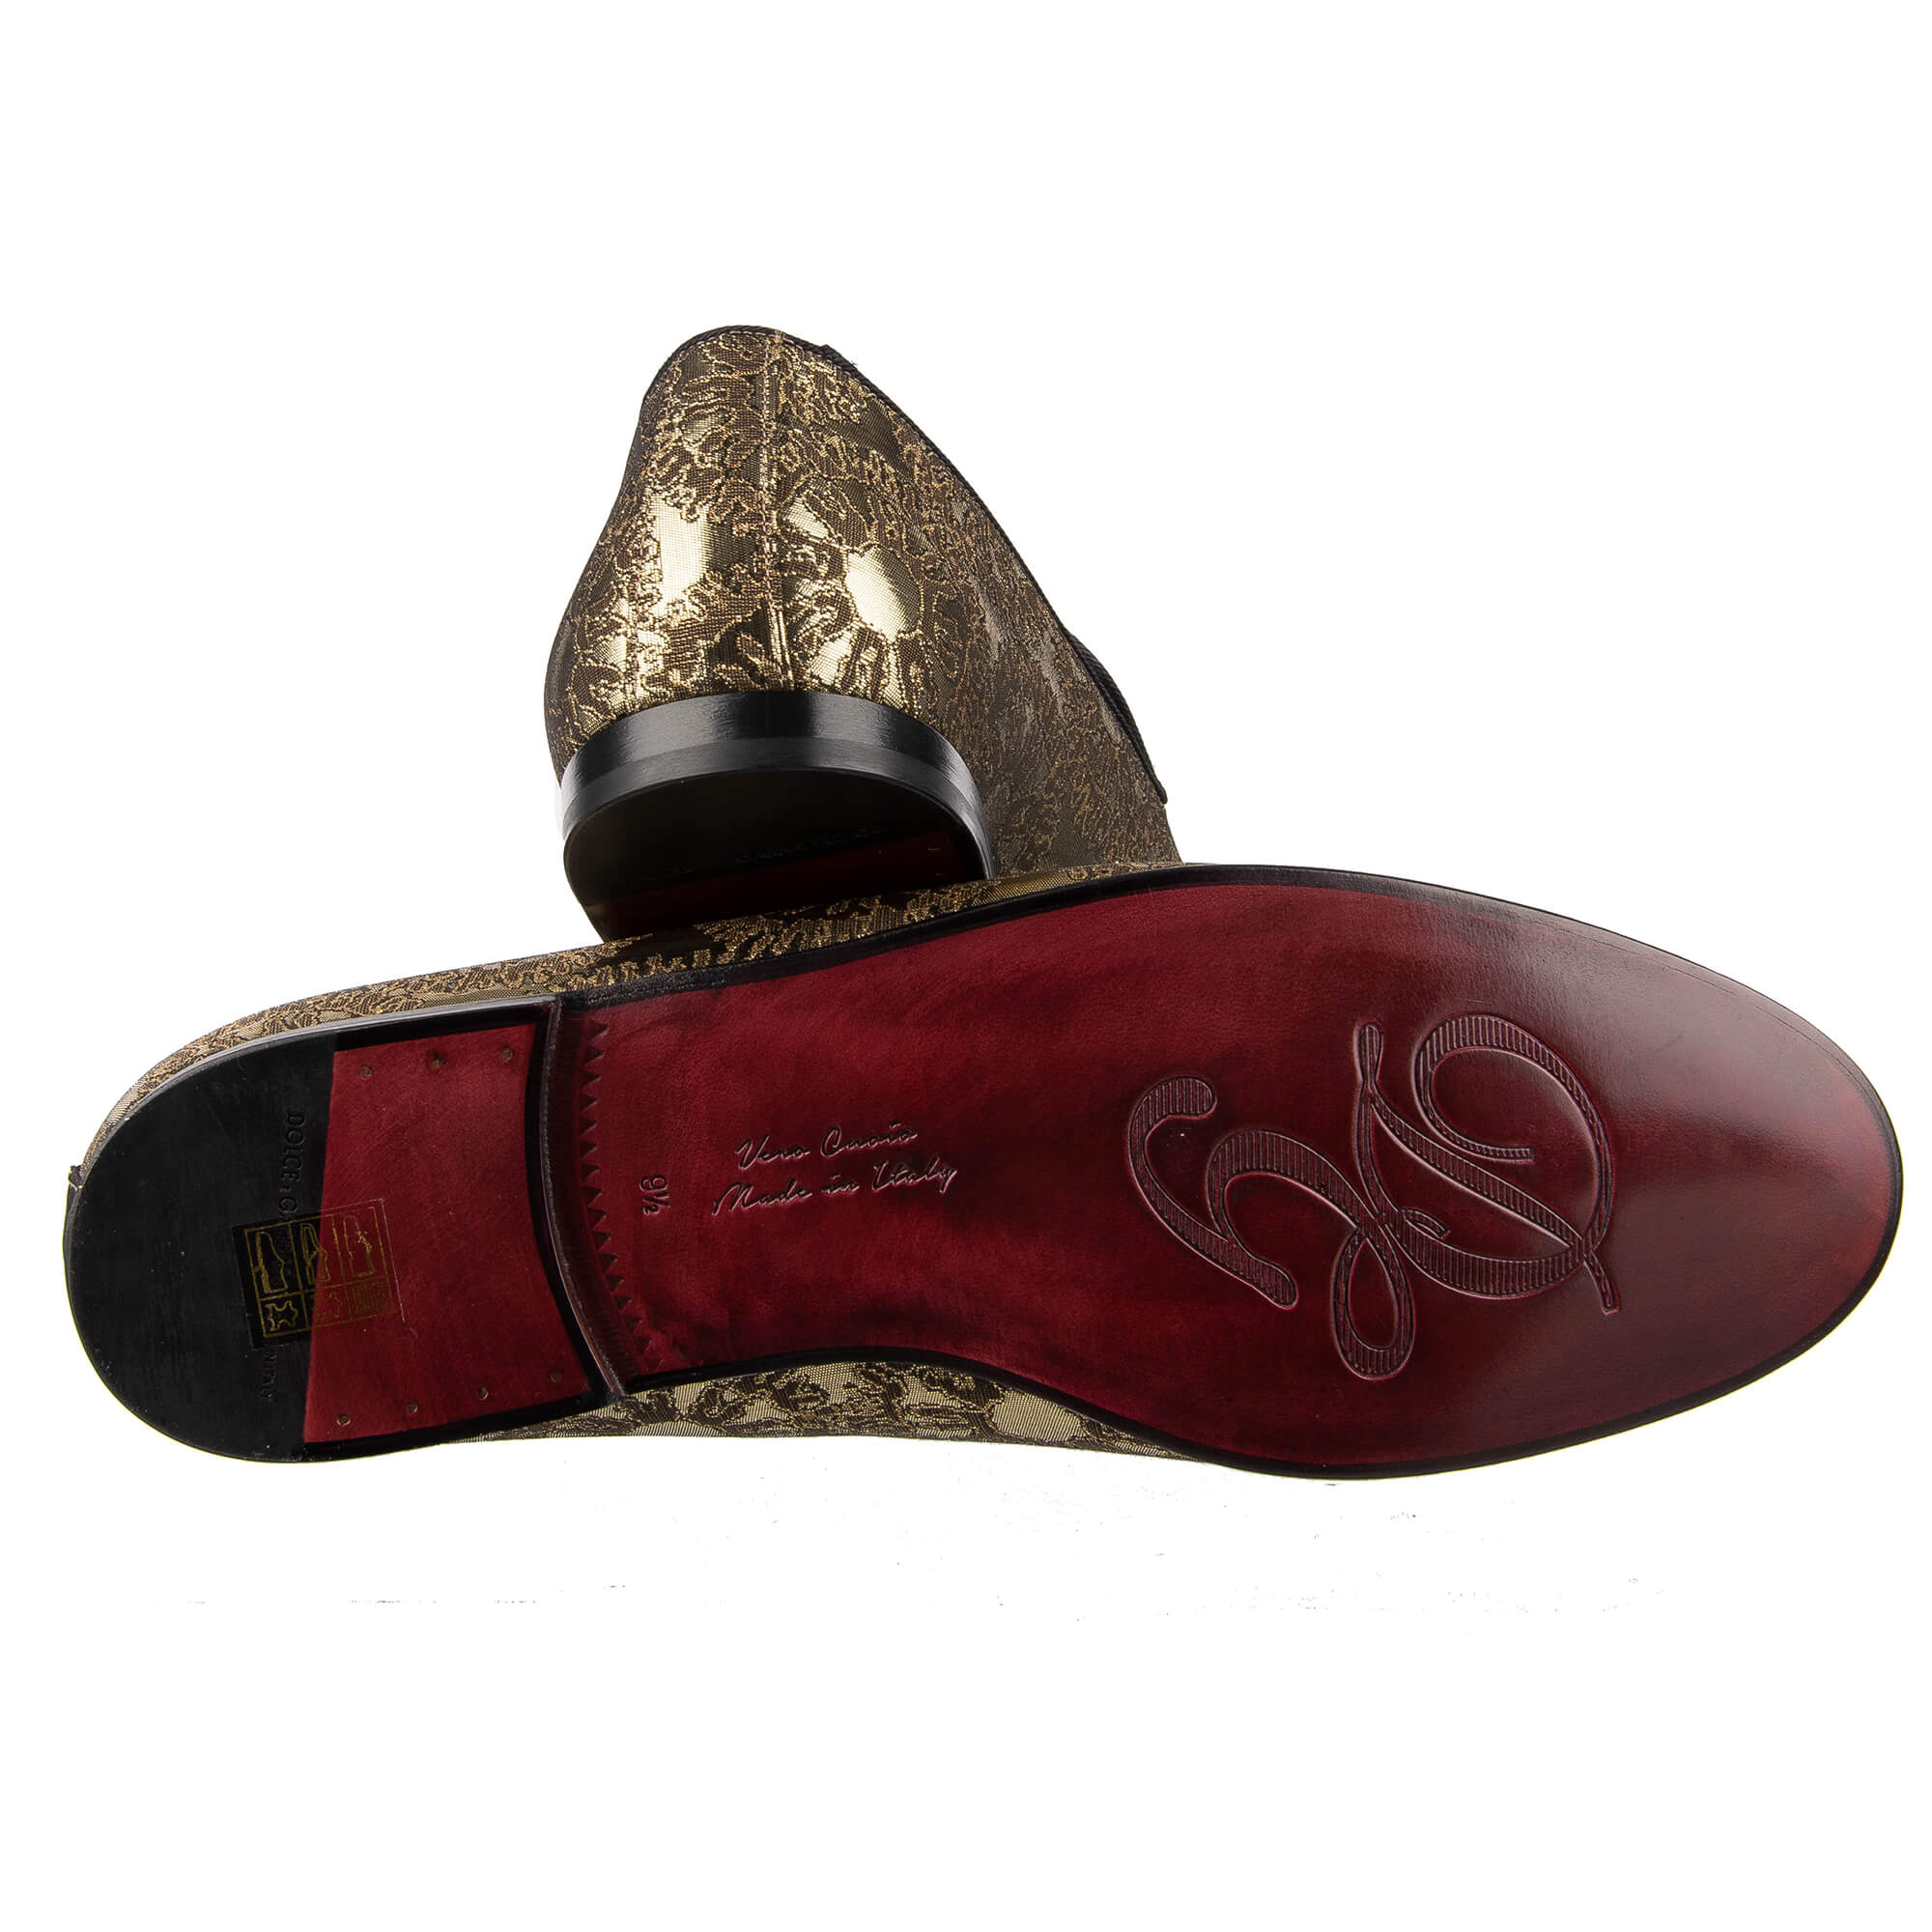 DOLCE & GABBANA Lurex Jacquard Floral Loafer Shoes YOUNG POPE Gold 09673